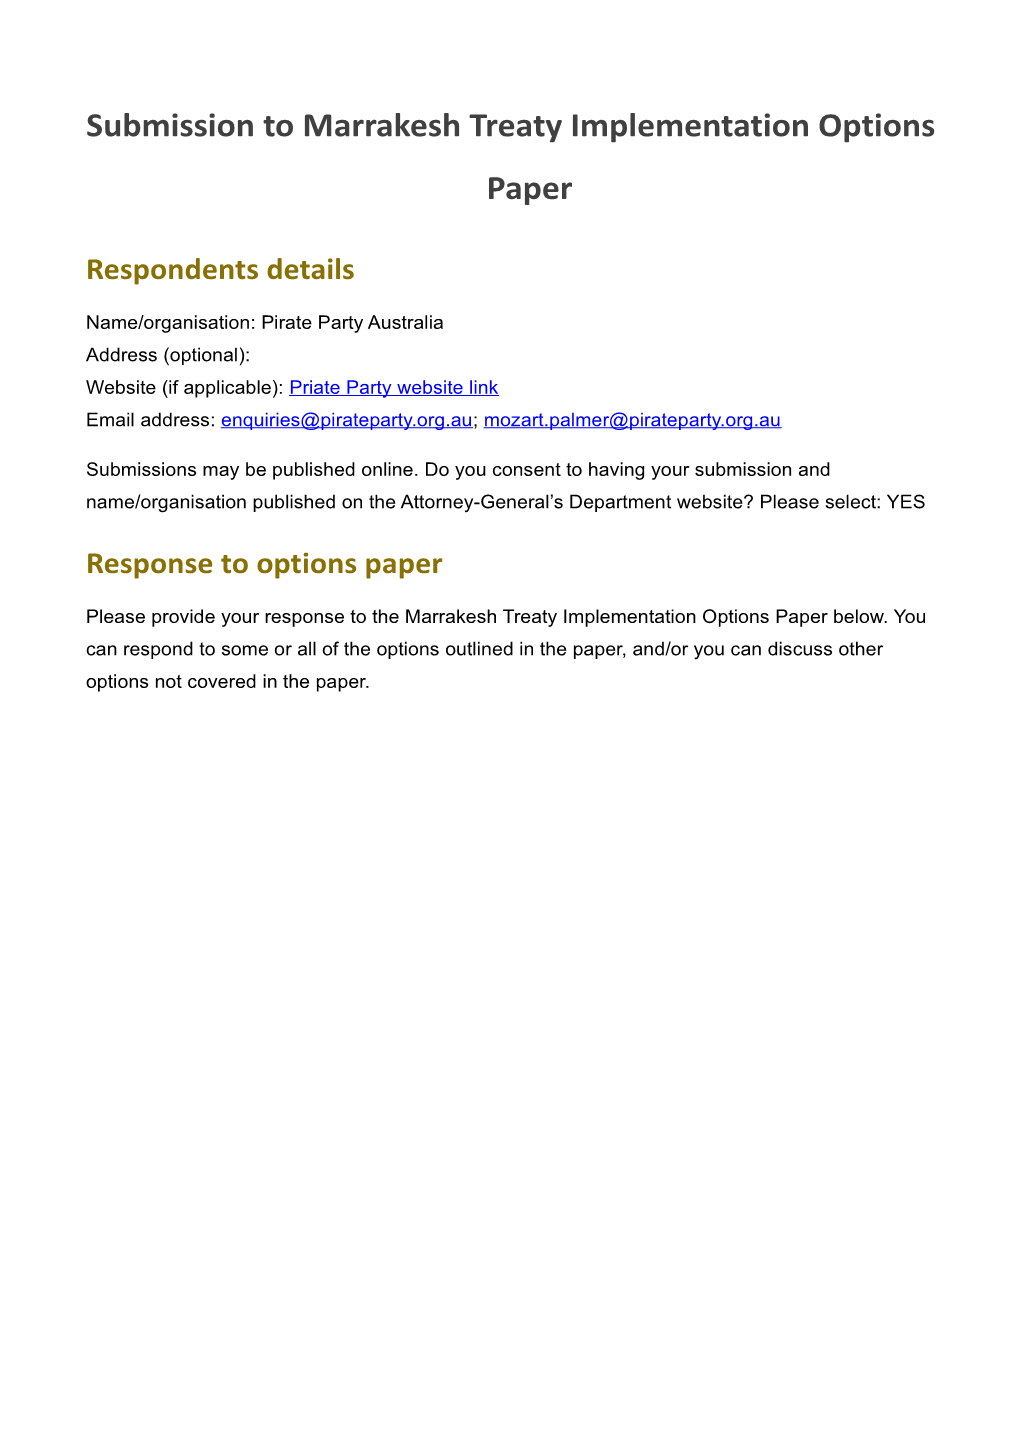 Pirate Party - Submission to Marrakesh Treaty Implementation Options Paper